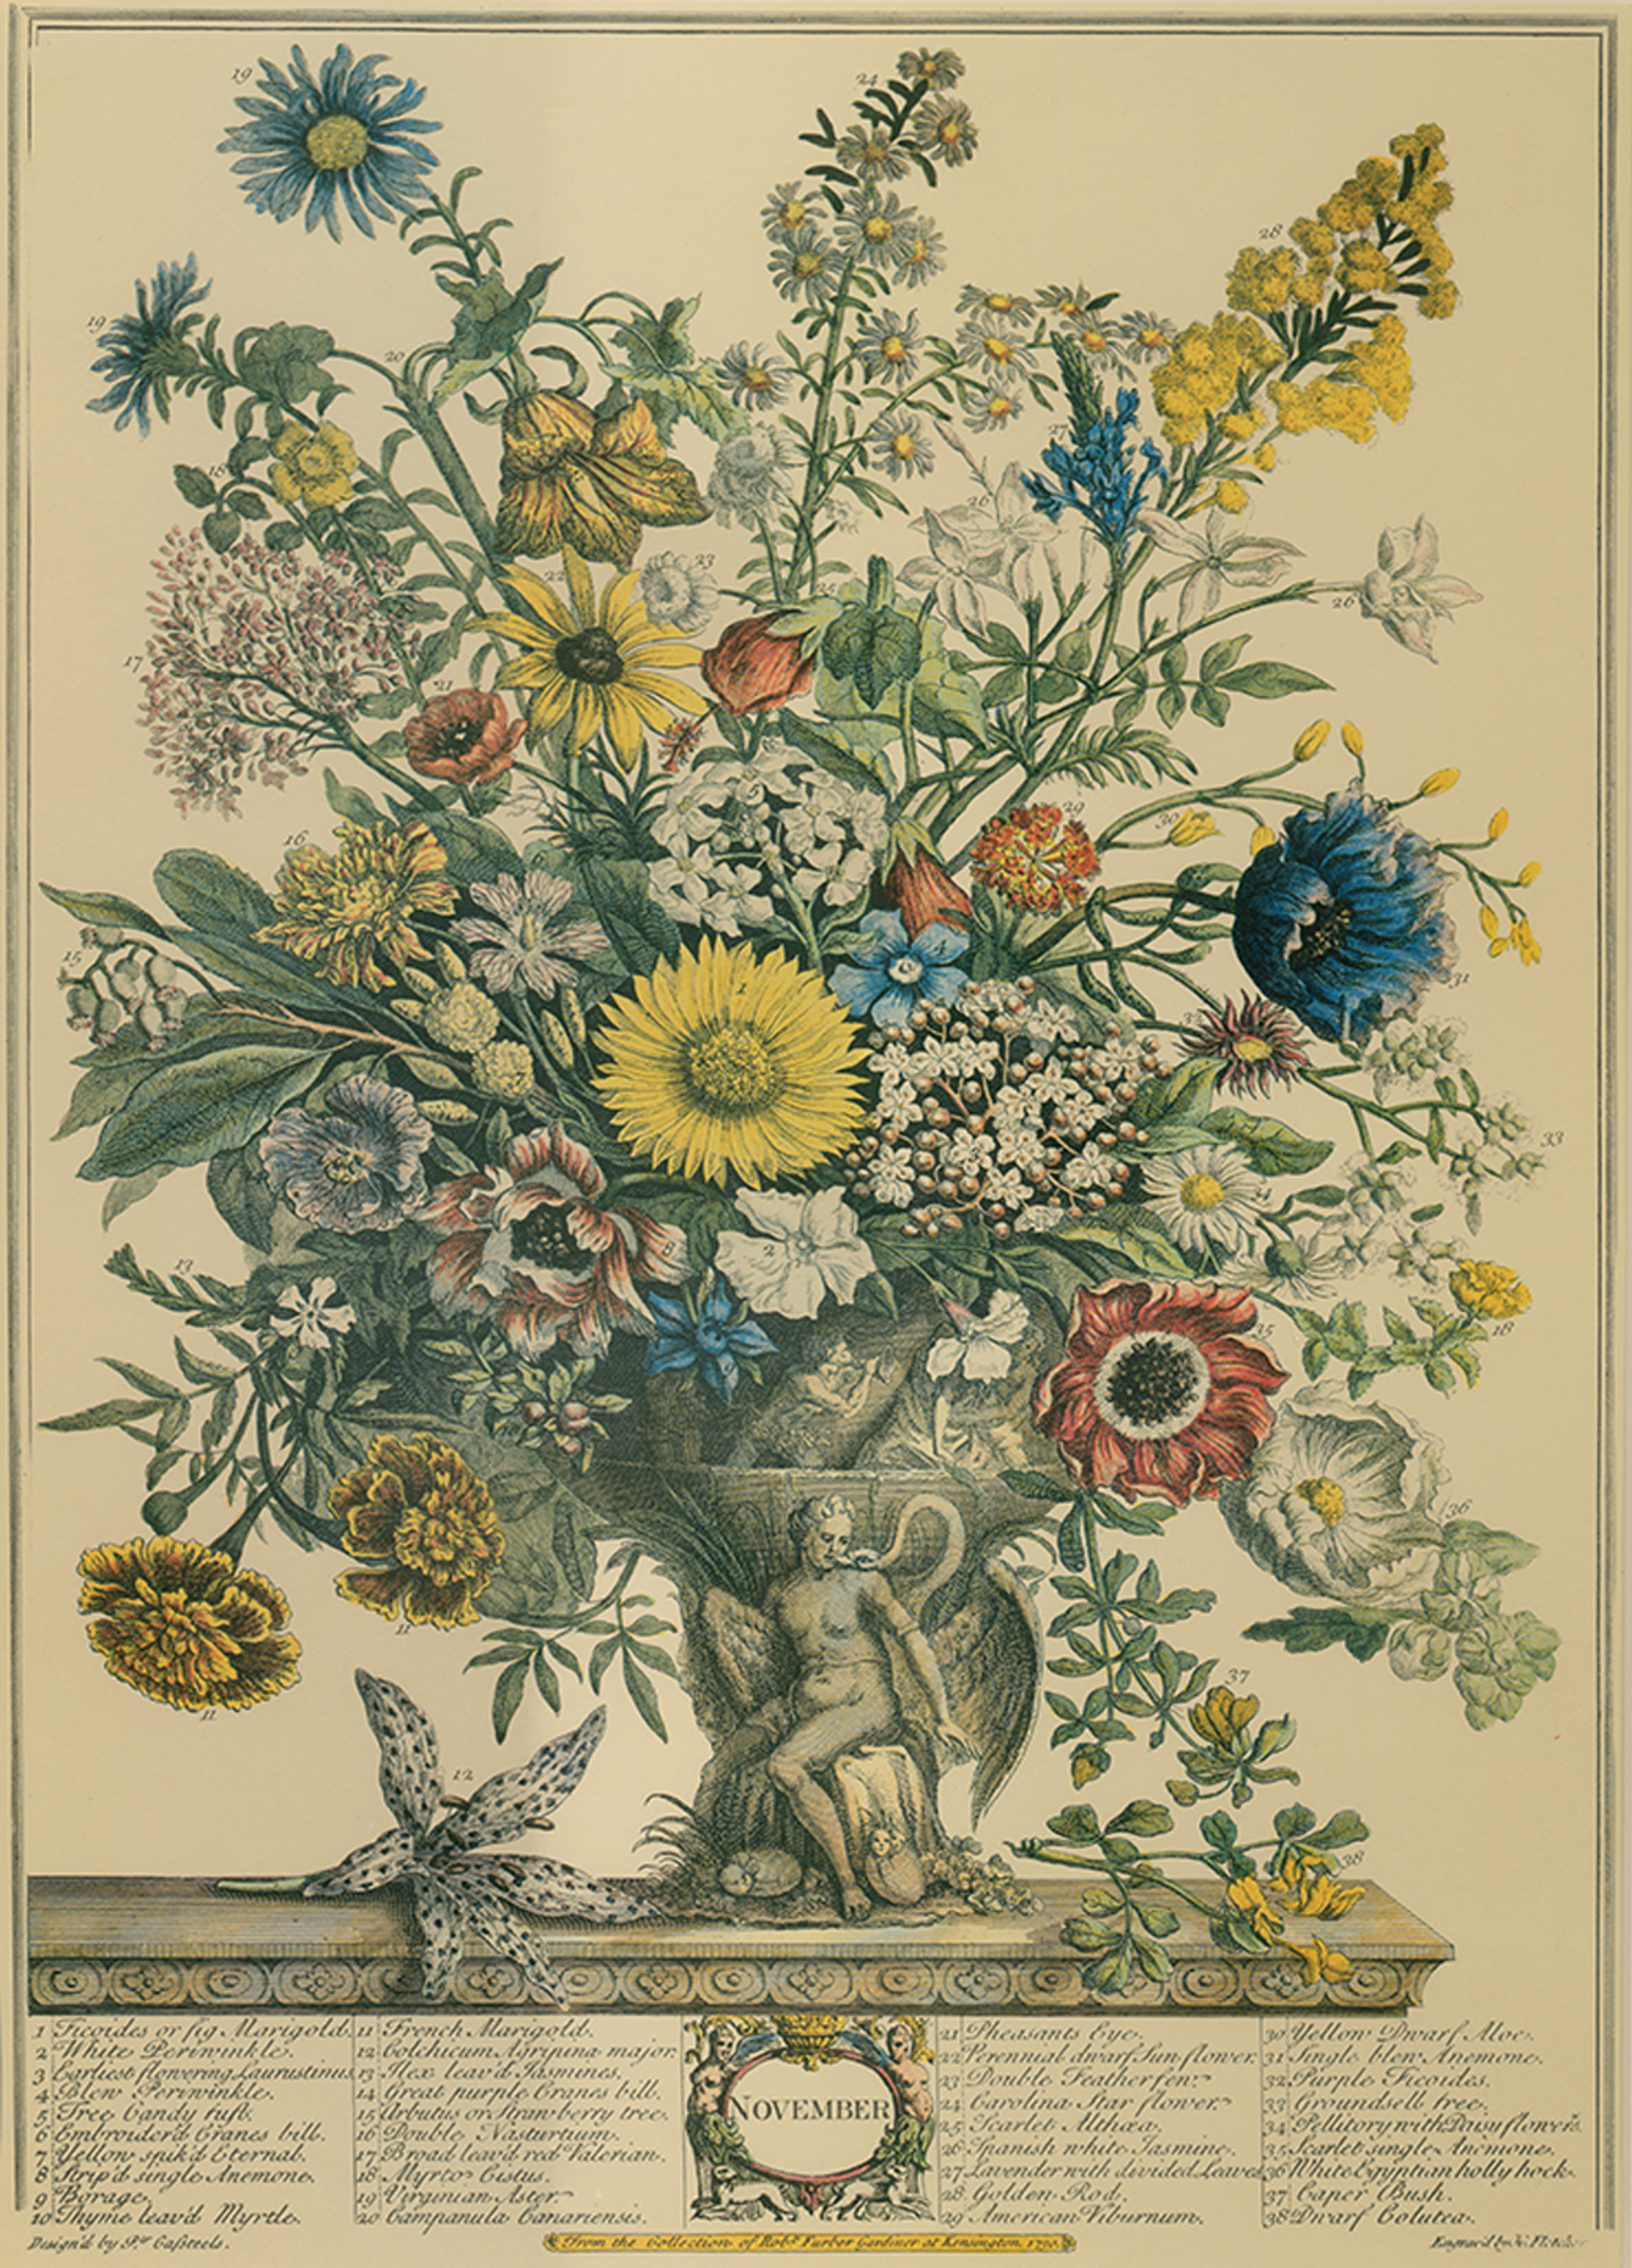 Twelve Months of Flowers from the Collection of Robert Furber, November